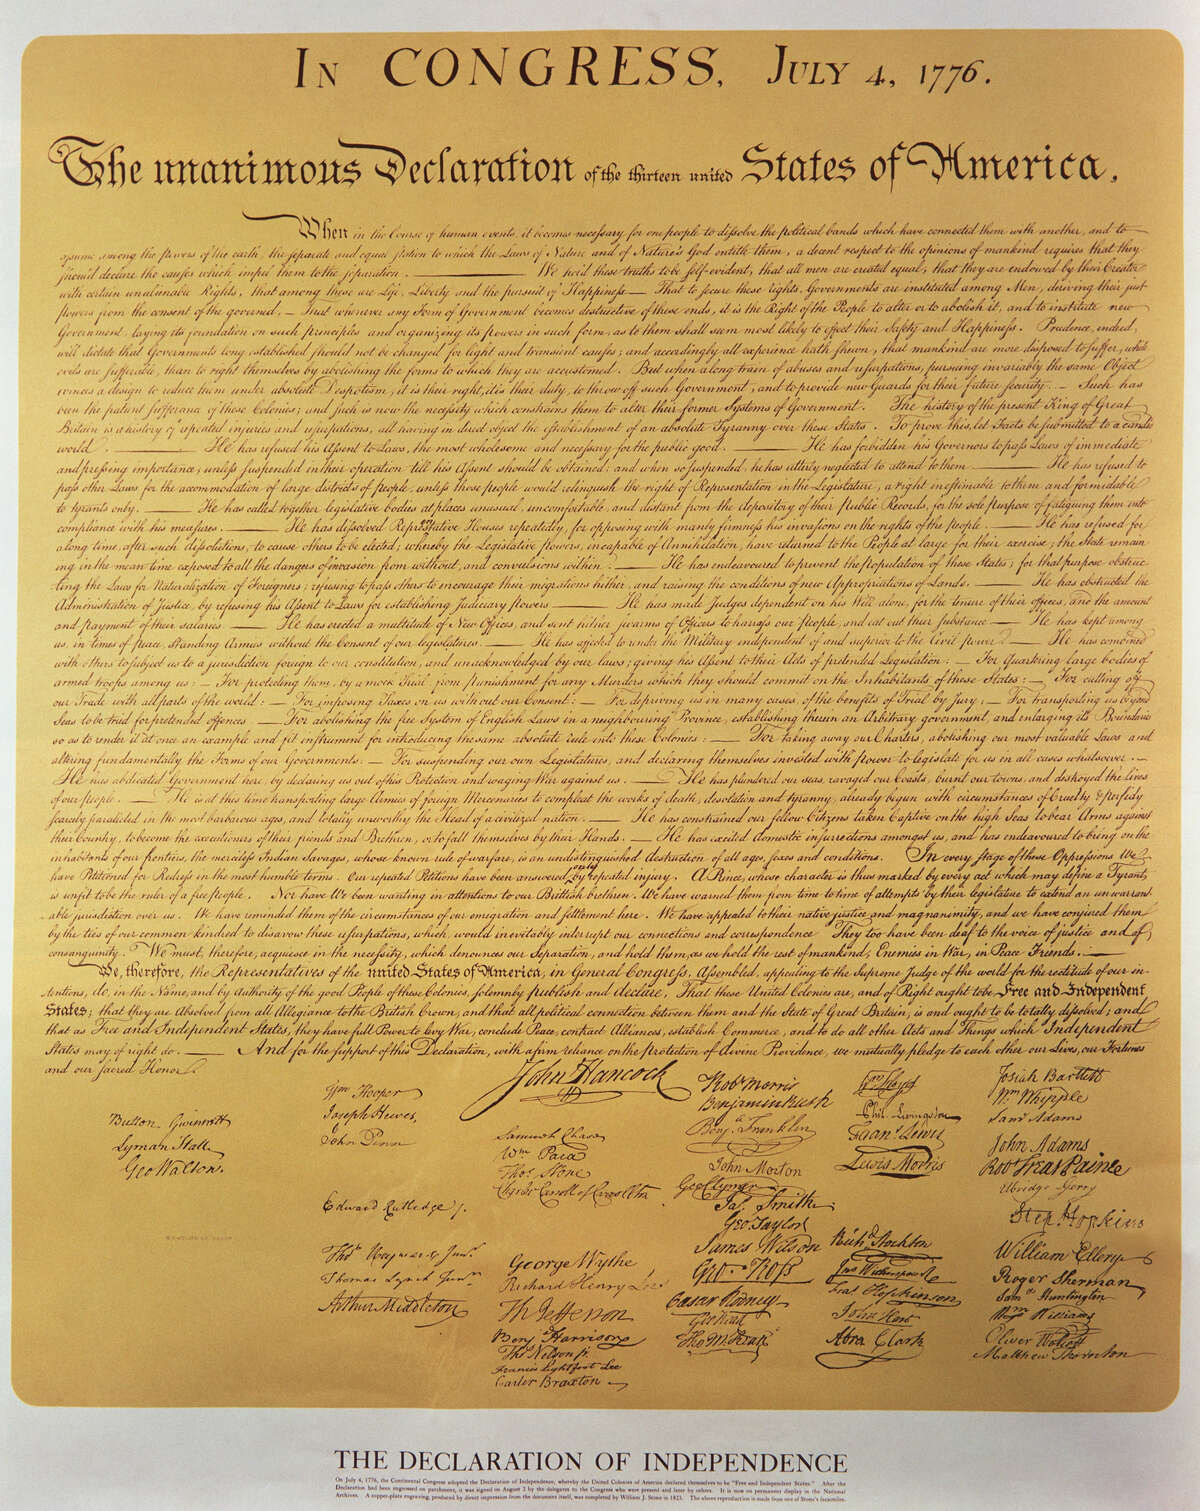 the entire declaration of independence